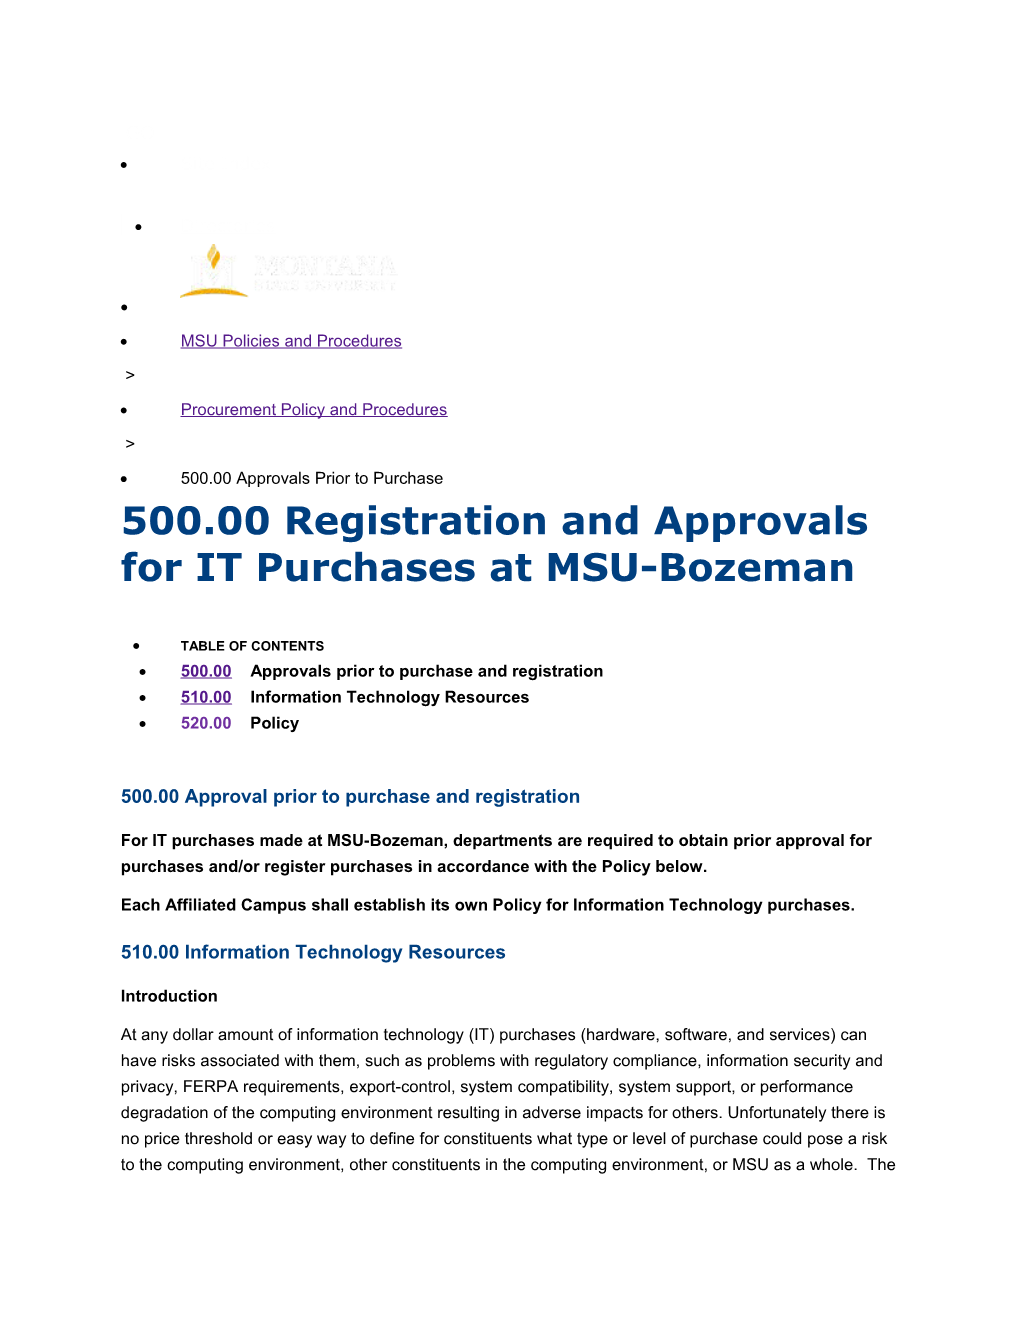 500.00 Registration and Approvals for IT Purchases at MSU-Bozeman